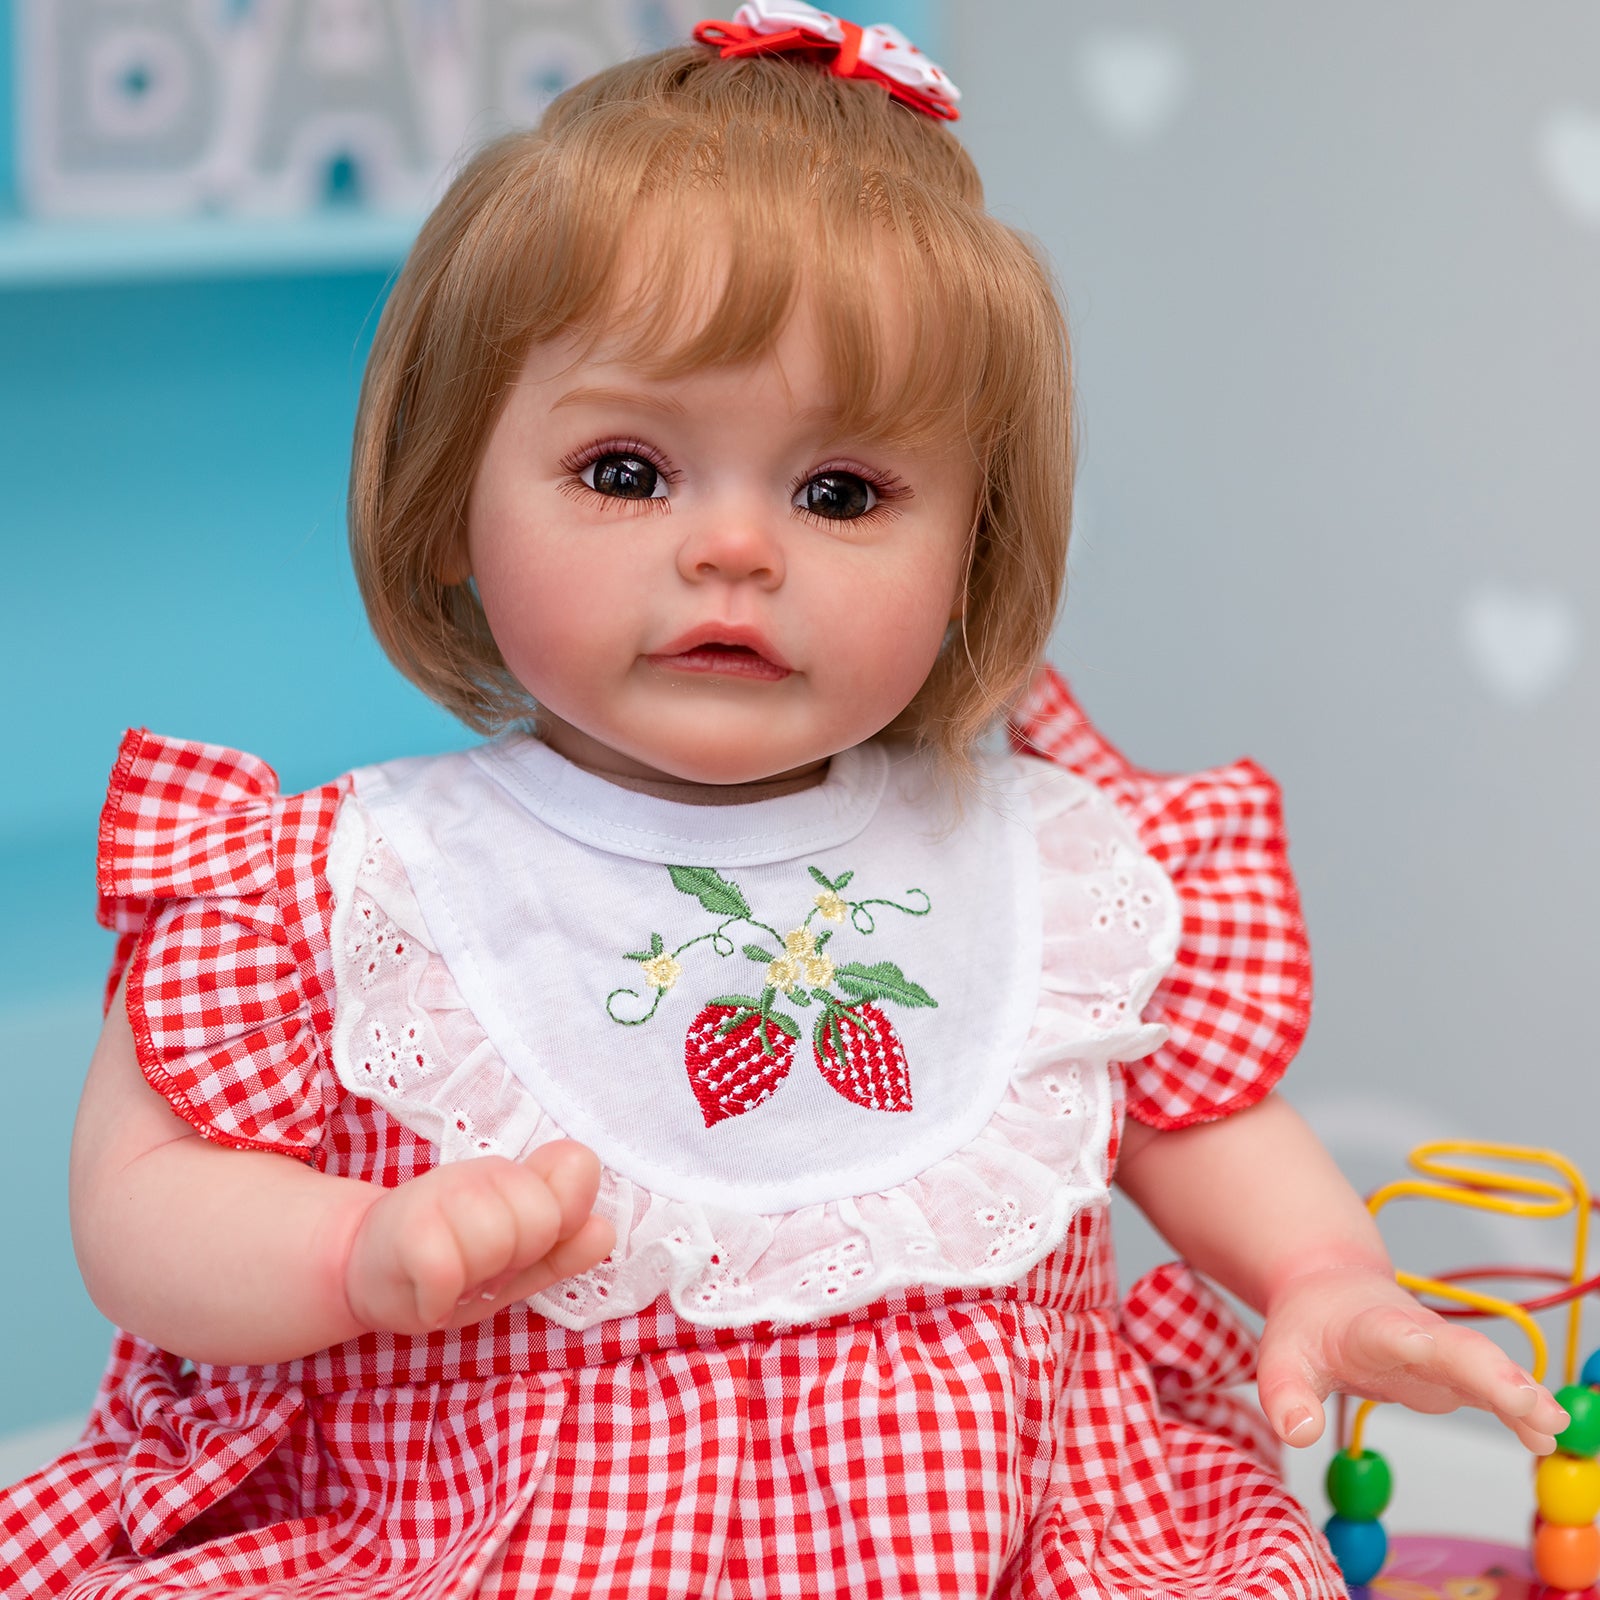 Lifelike baby dolls | reborn baby dolls | Realistic baby dolls| newborn baby dolls | real life baby dolls | therapy dolls for adults | anatomically correct baby girl doll | infant baby doll | gift for kids ages 3+ girl | dementia patients | bebes reales de silicona cuerpo completo | reborn baby dolls weighted cloth body | birthday gift | collection | girl | boys |  mother | daughter | granddaughter | sleeping |real look real baby dolls that look real looking | toddler | Mothers day | 3 4 5 6 7 8 9 years